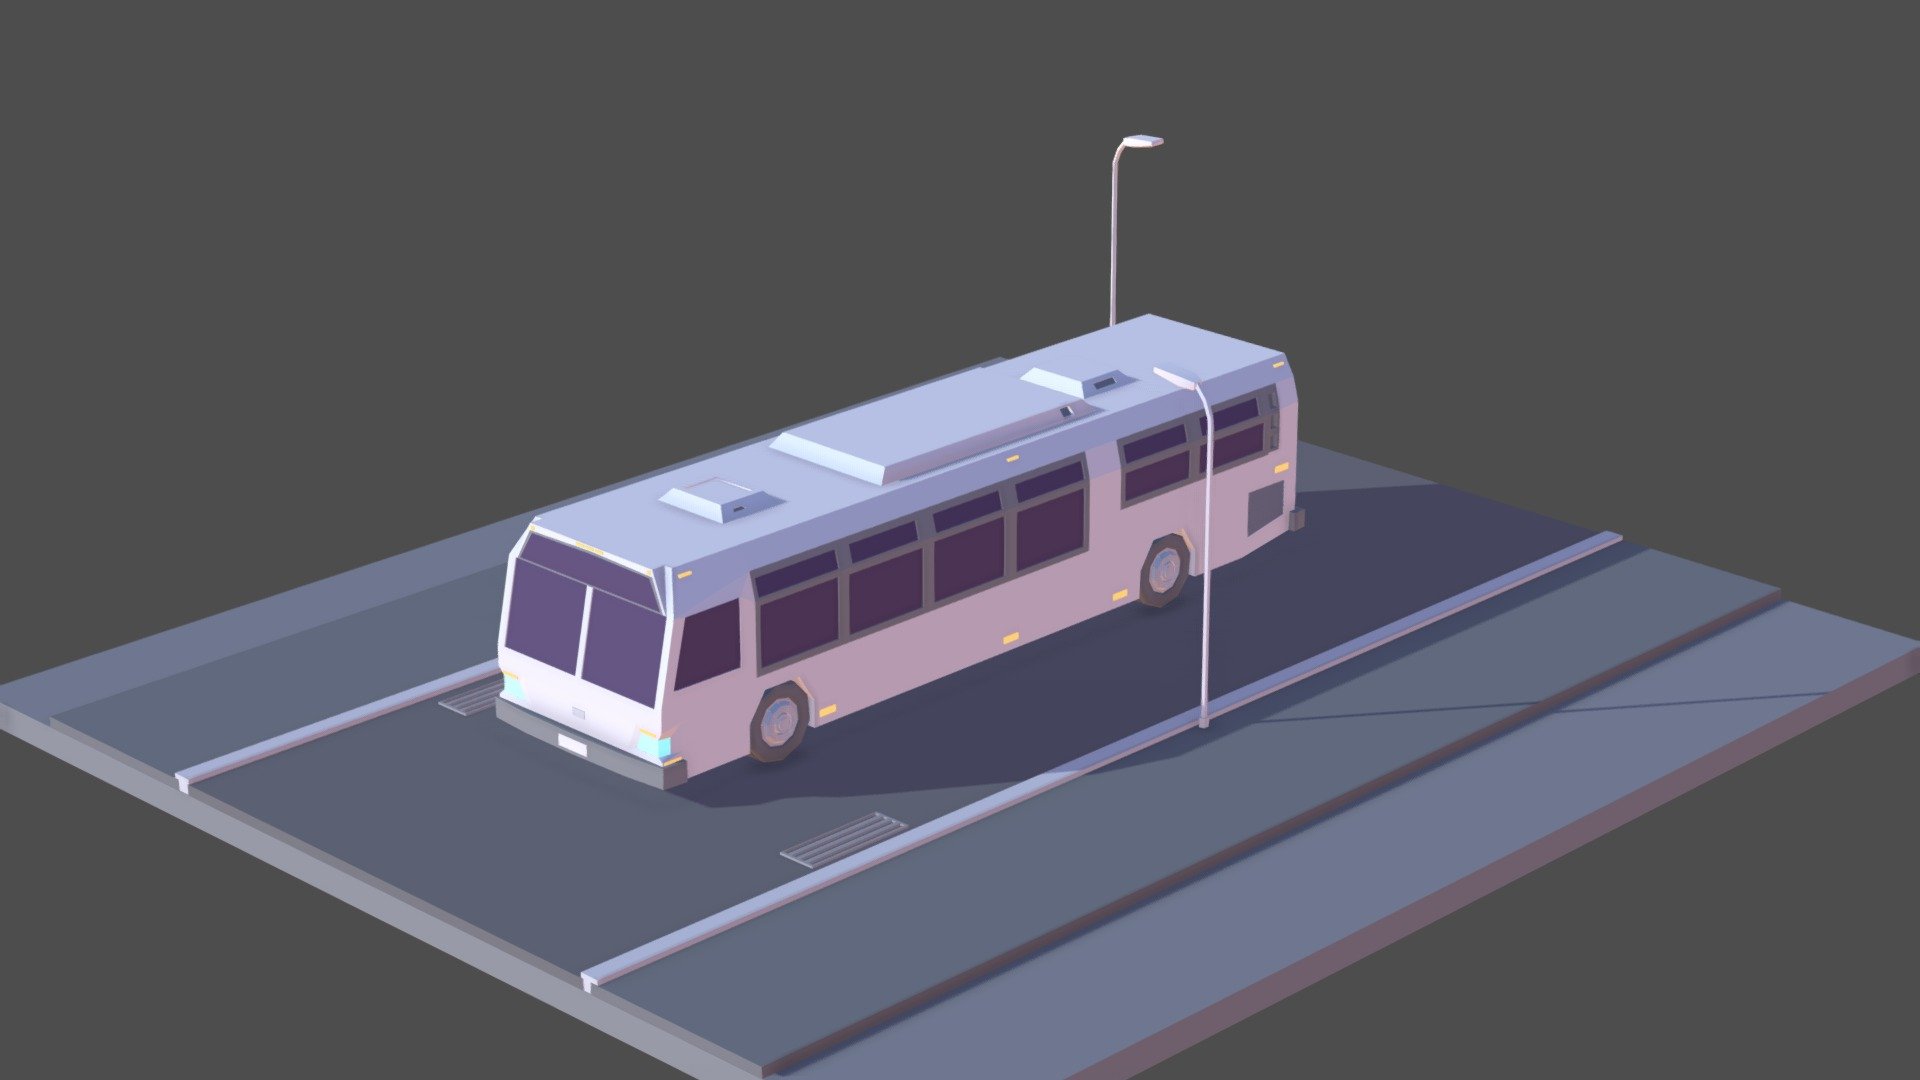 Cartoon Low Poly Coevette Sportcar illustration

Created on Cinema 4d R17 

4783 Polygons

Procedural Textured 

Game Ready, VR Ready
 - Cartoon Low Poly New York Bus - Buy Royalty Free 3D model by antonmoek 3d model